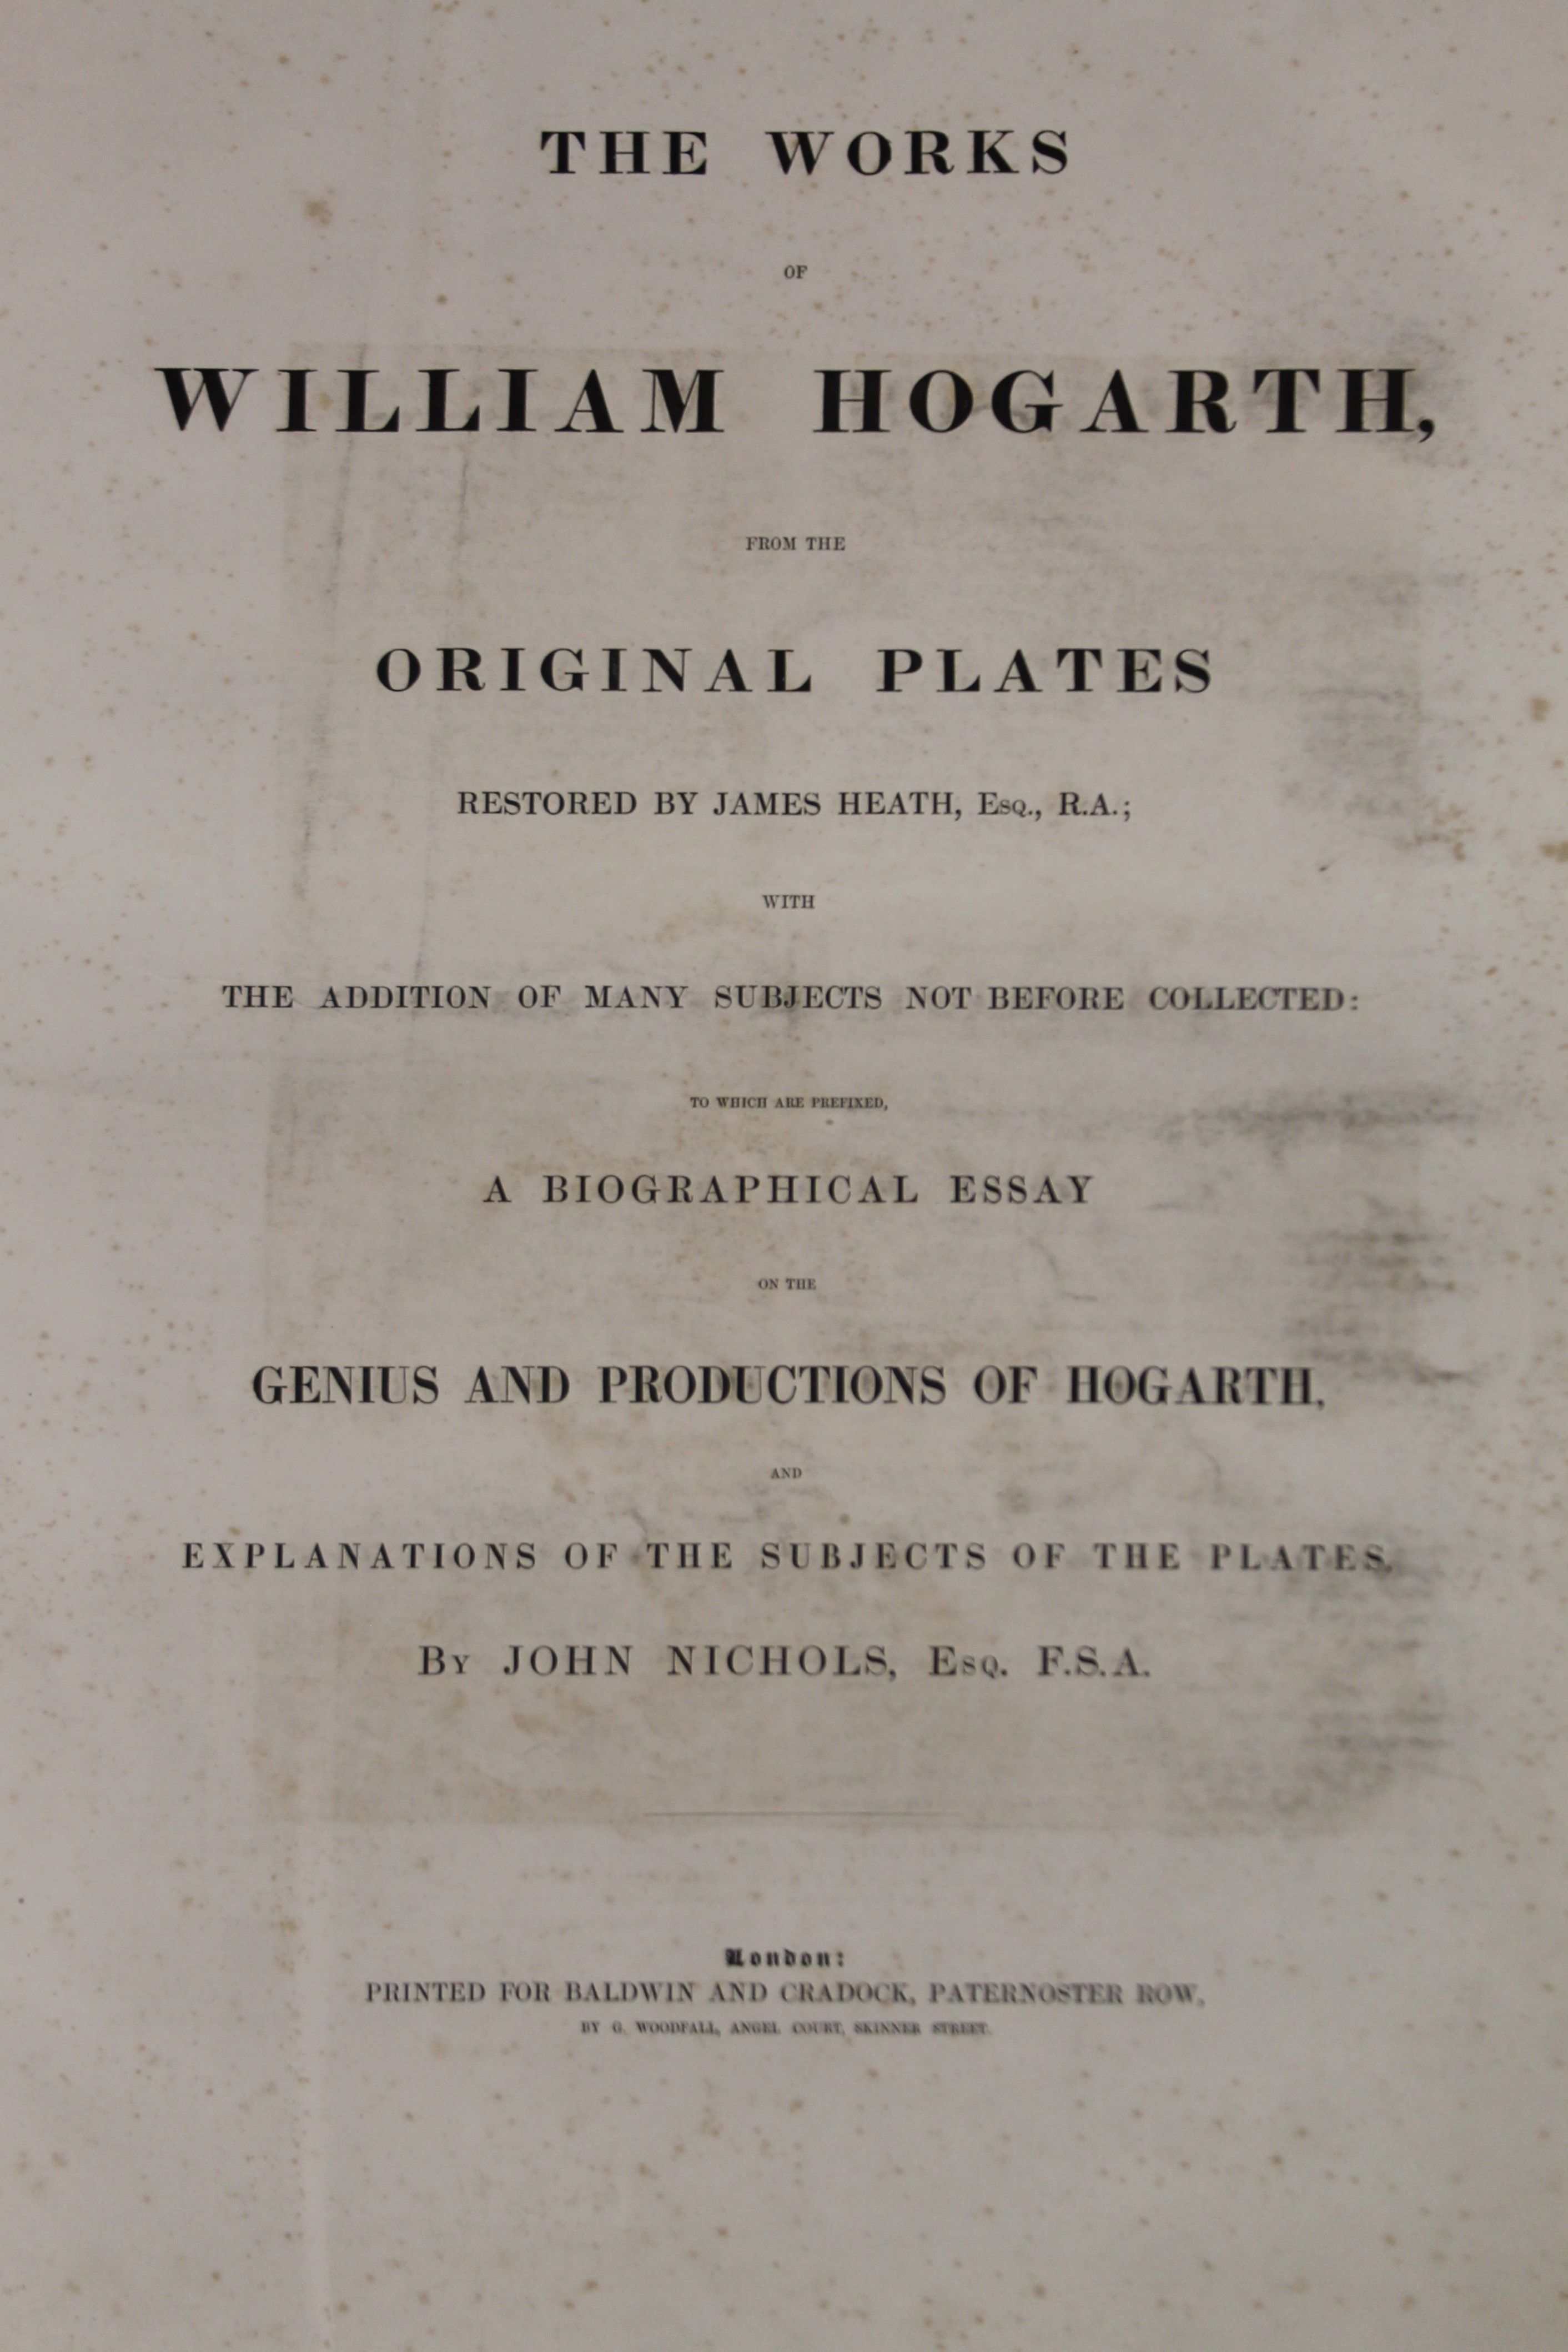 The Works of William Hogarth from the original plates restored by James Heath with the addition of - Image 5 of 29